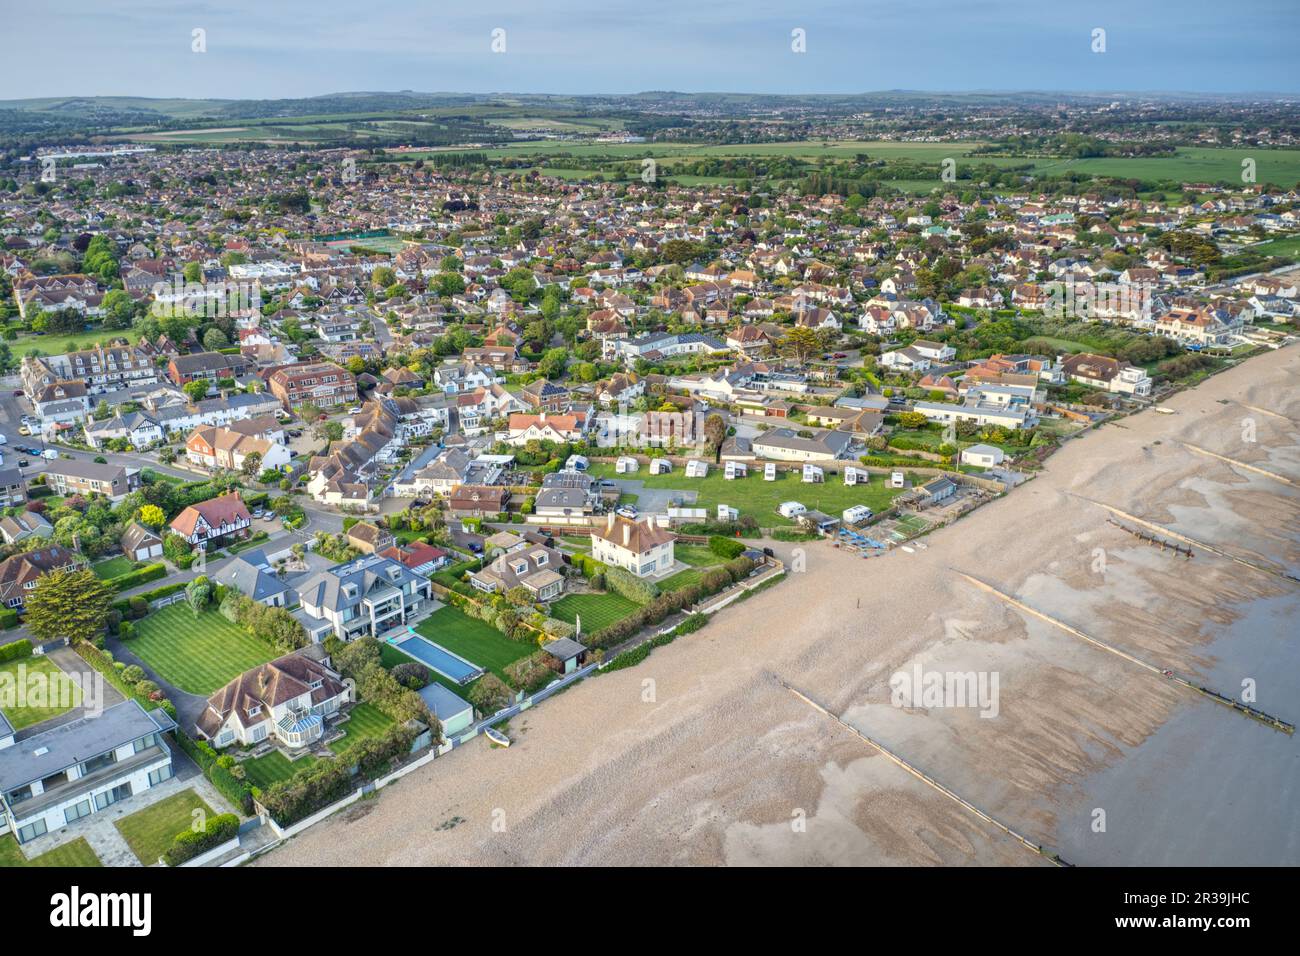 East Preston seafront in West Sussex looking towards Angmering by Sea, Aerial. Stock Photo